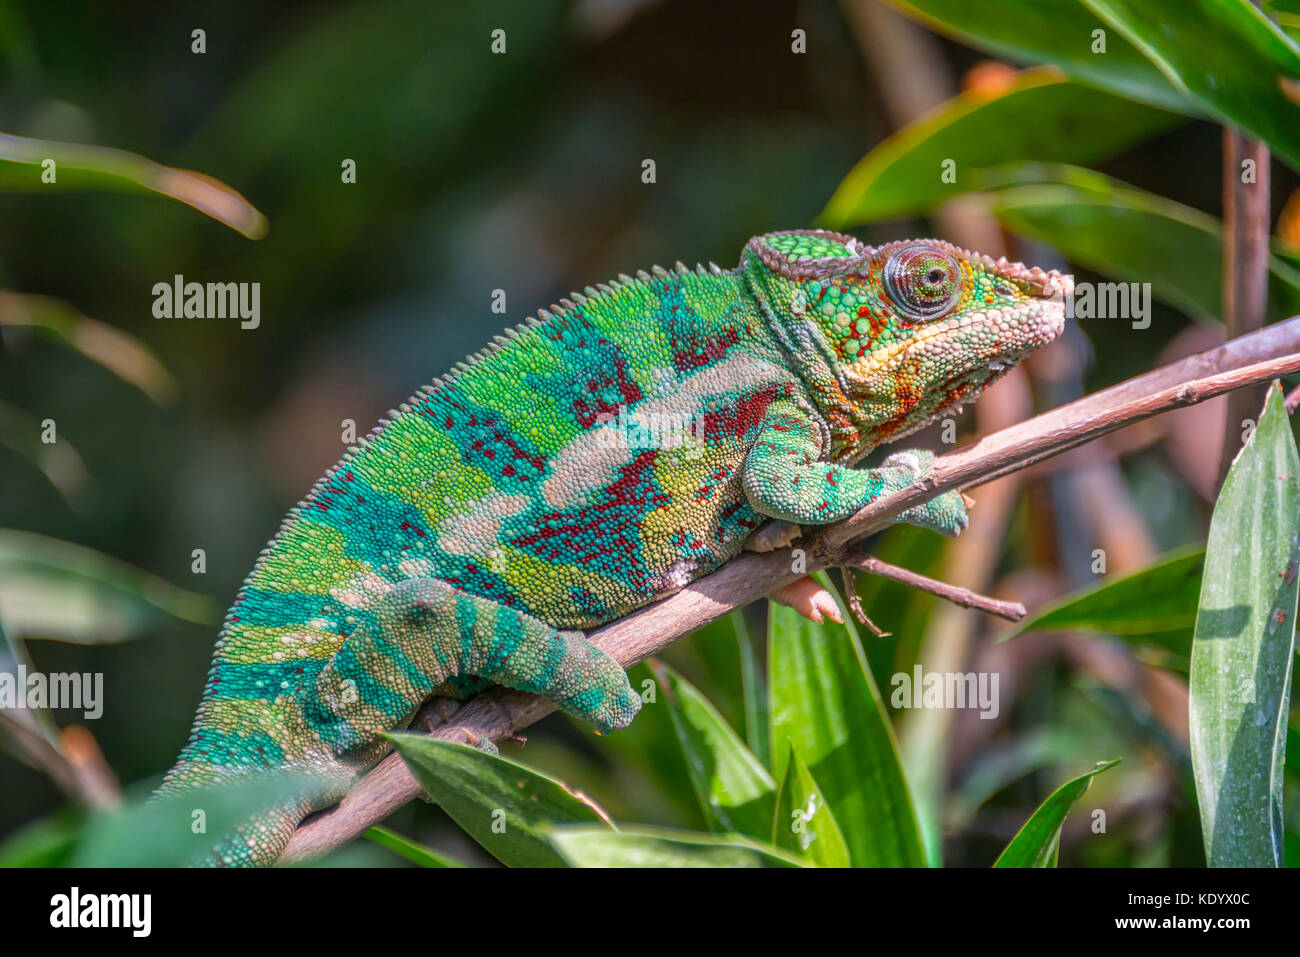 Profile view of a colorful chameleon on a branch Stock Photo